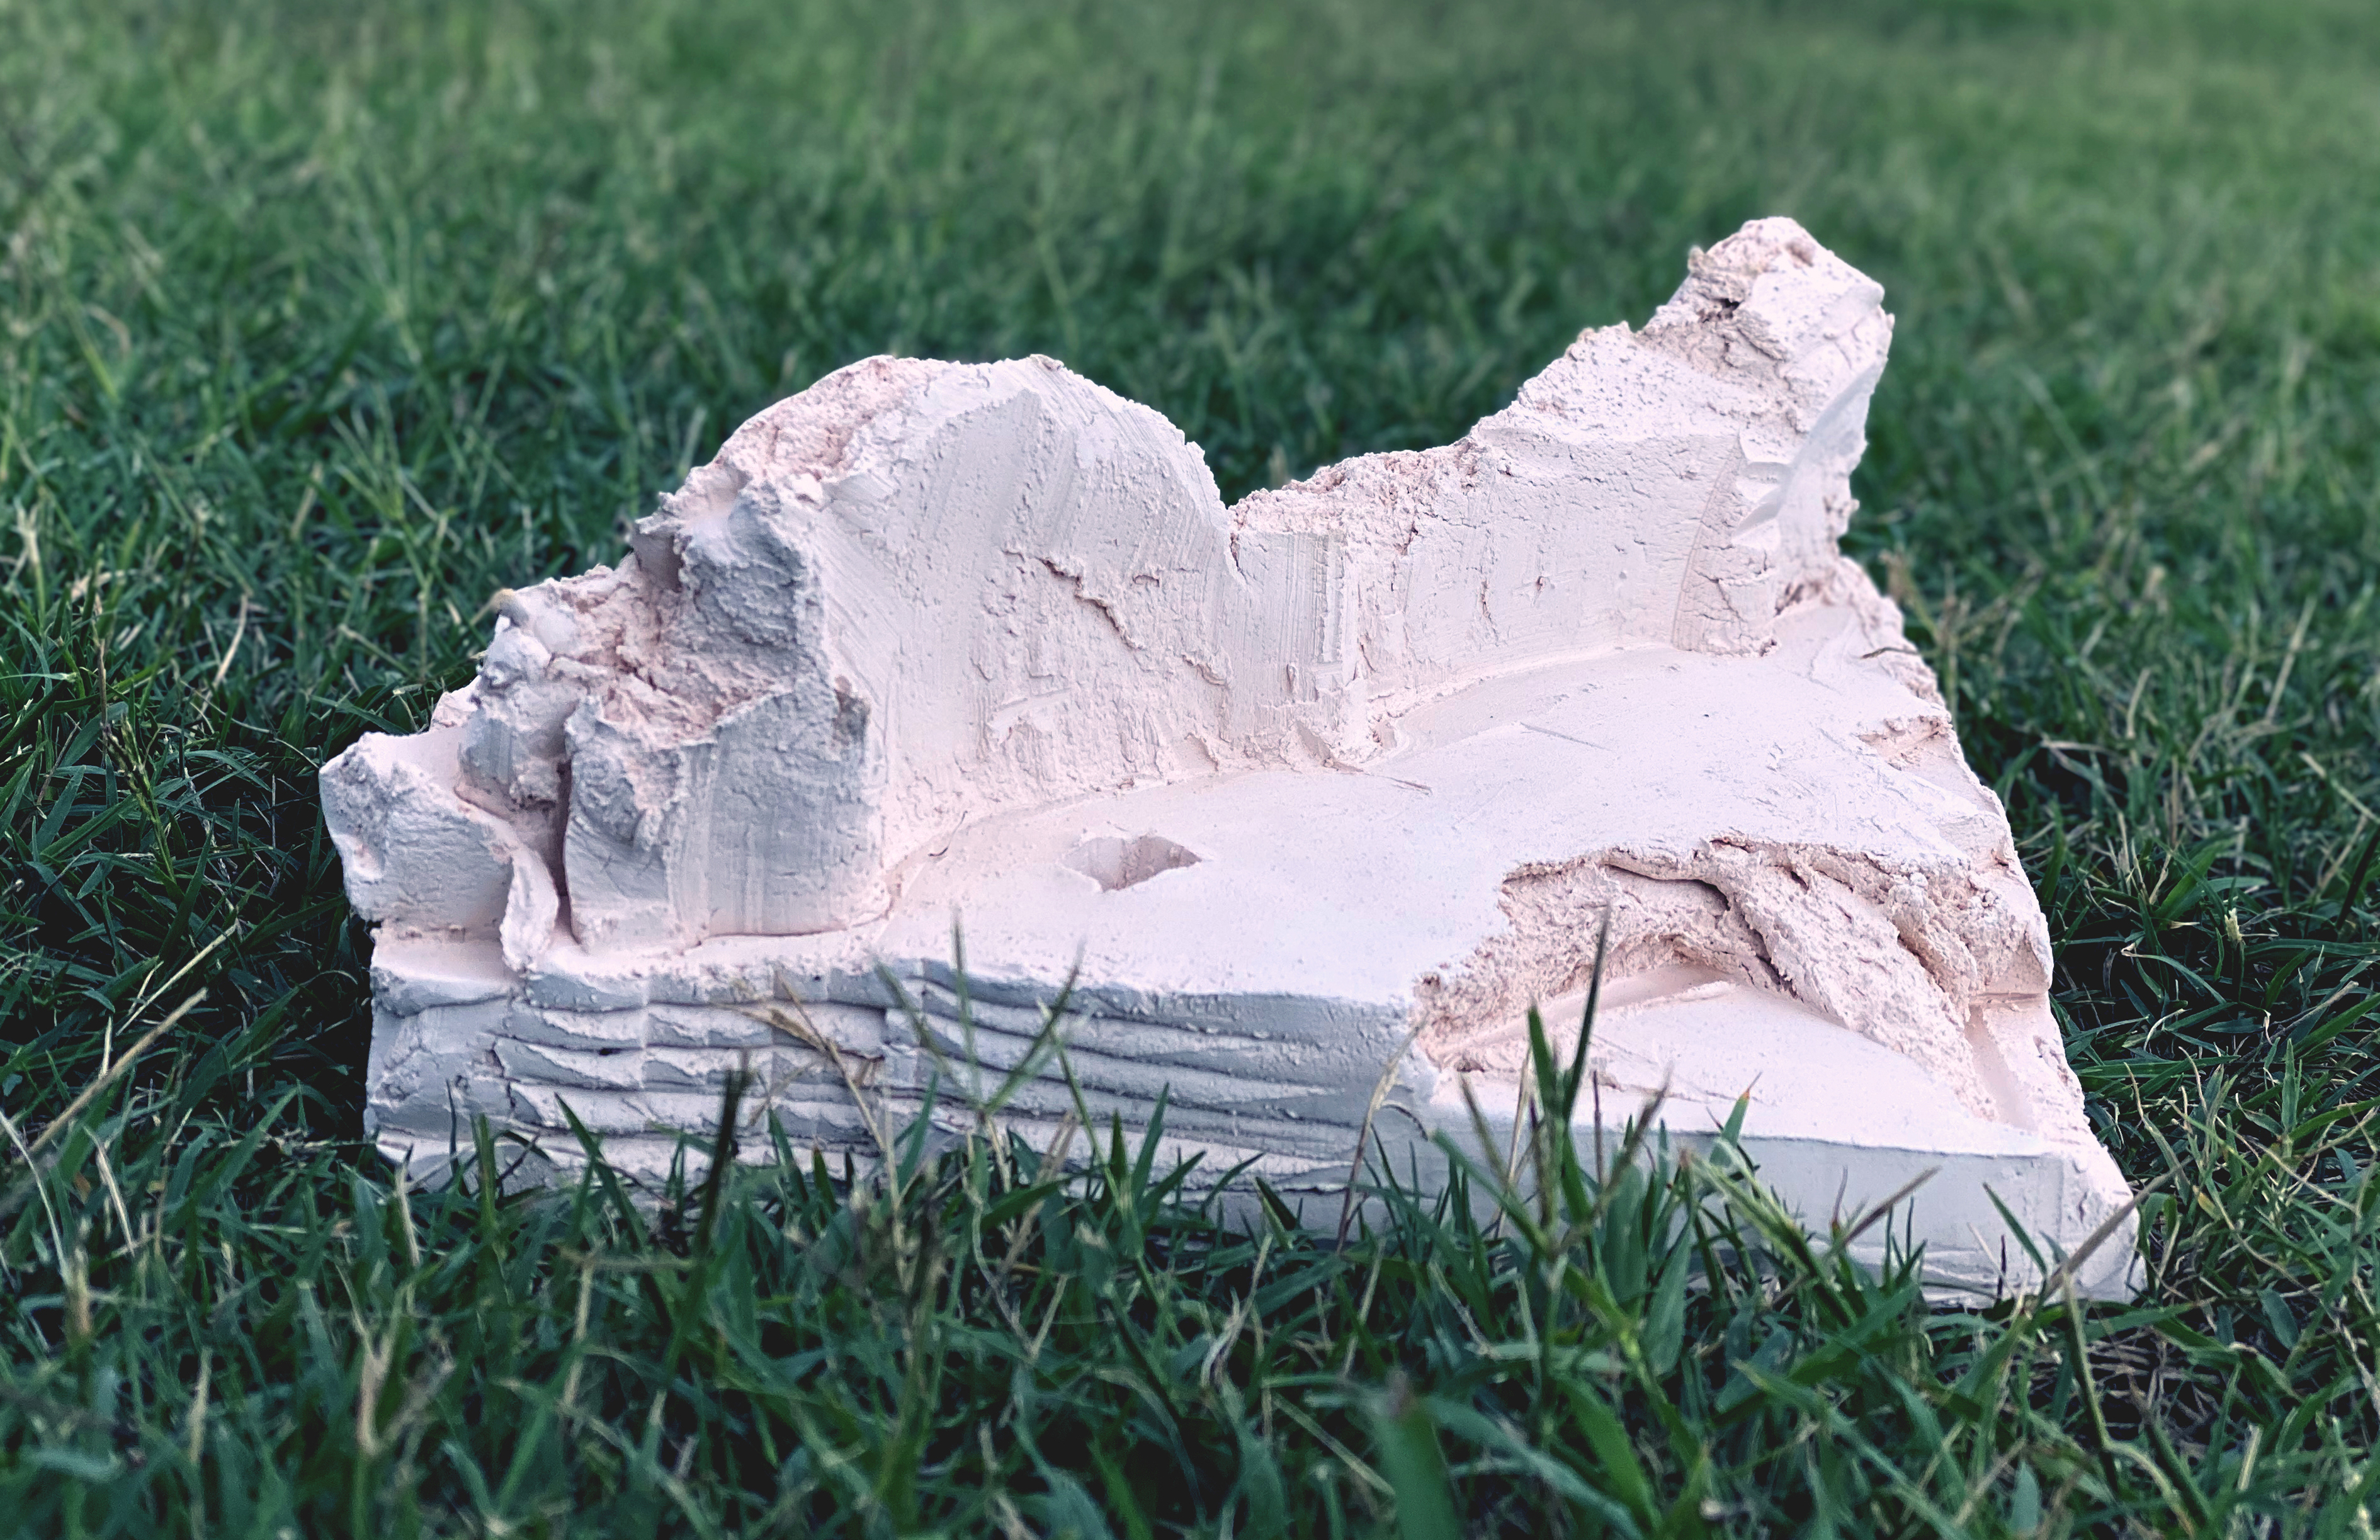 An abstract ceramic chunk, pictured sitting atop green grass in a tightly cropped photo